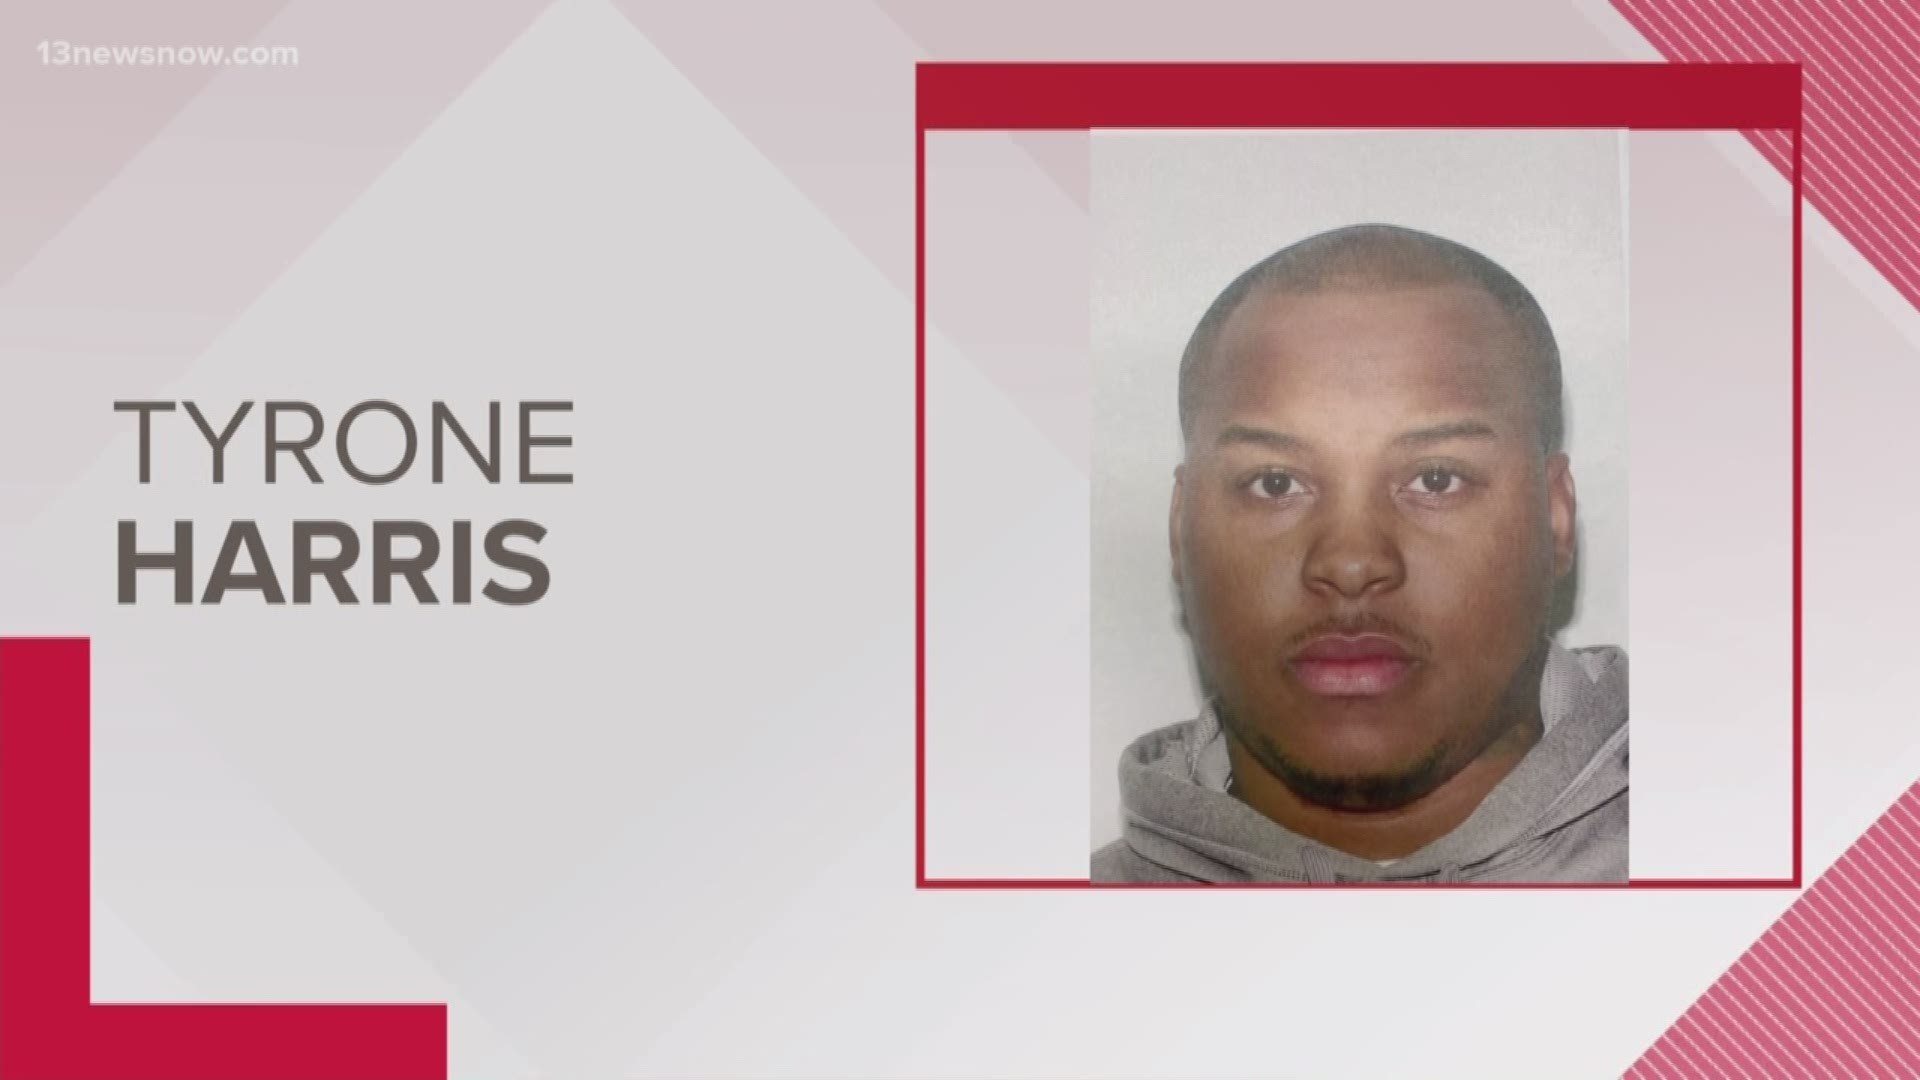 Marshals found 25-year-old Tyrone Harris in South Carolina. He's charged with abduction, malicious wounding, hit & run, strangulation, rape and grand larceny.